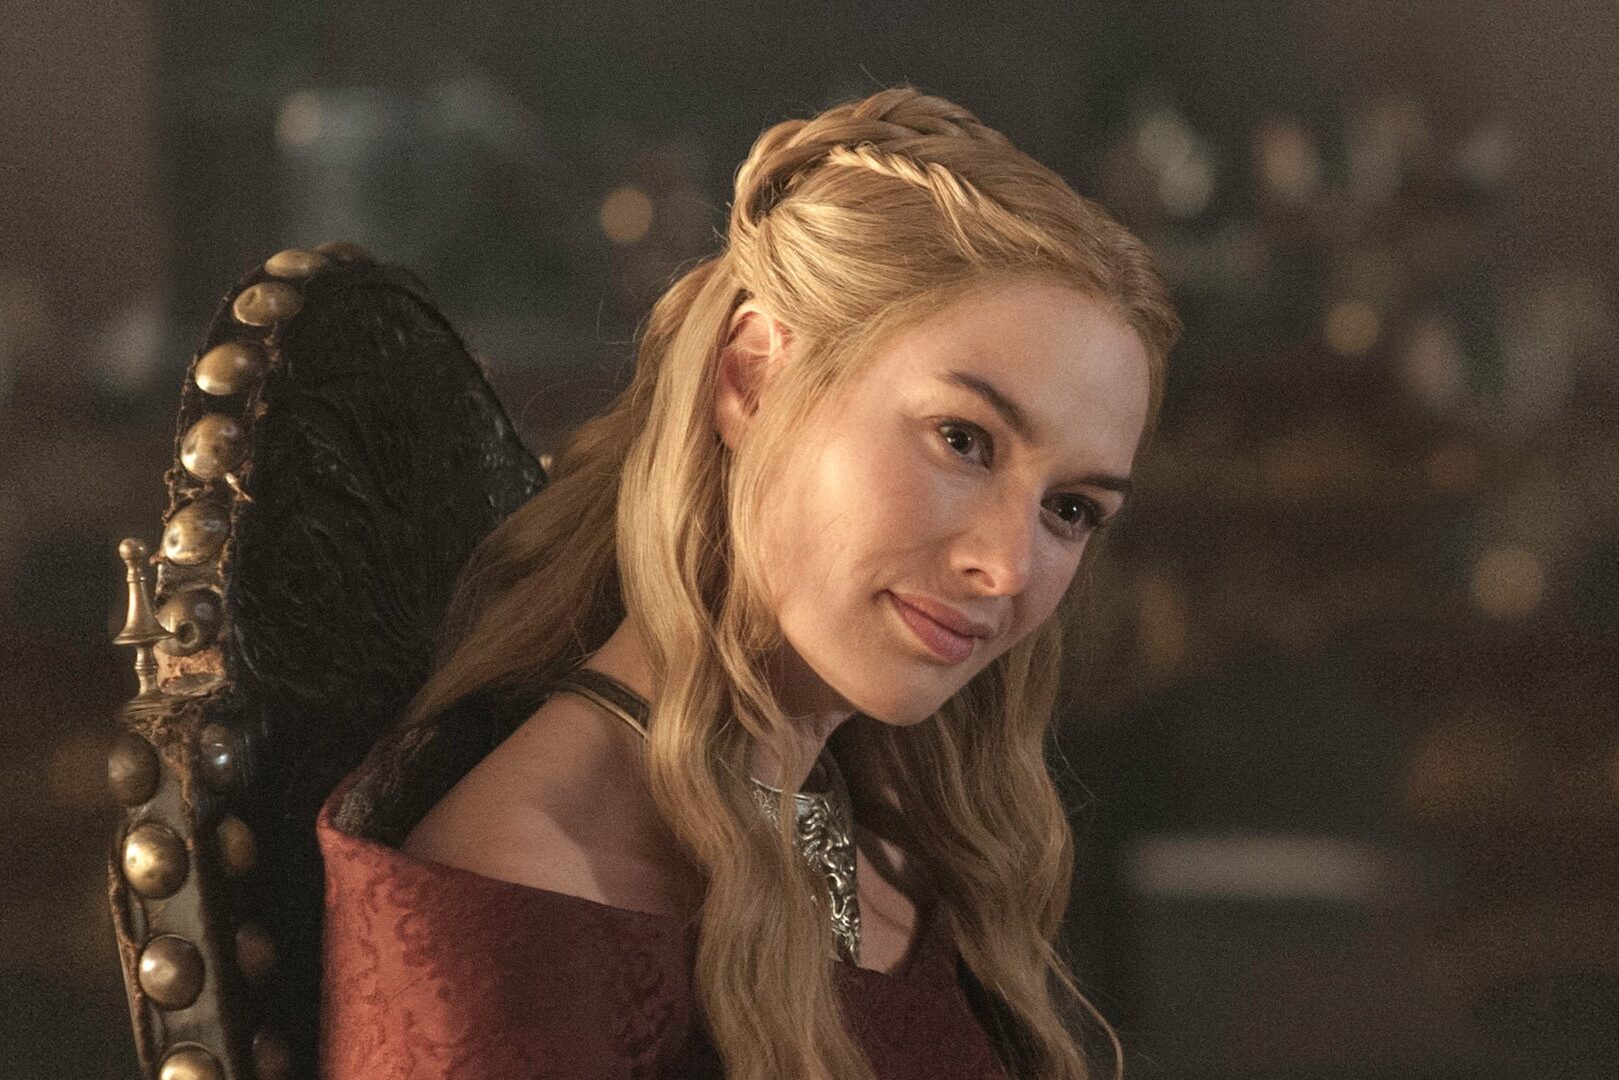 Game Of Thrones Cersei Lannister Actress Lena Headey Made Millions From Broke!